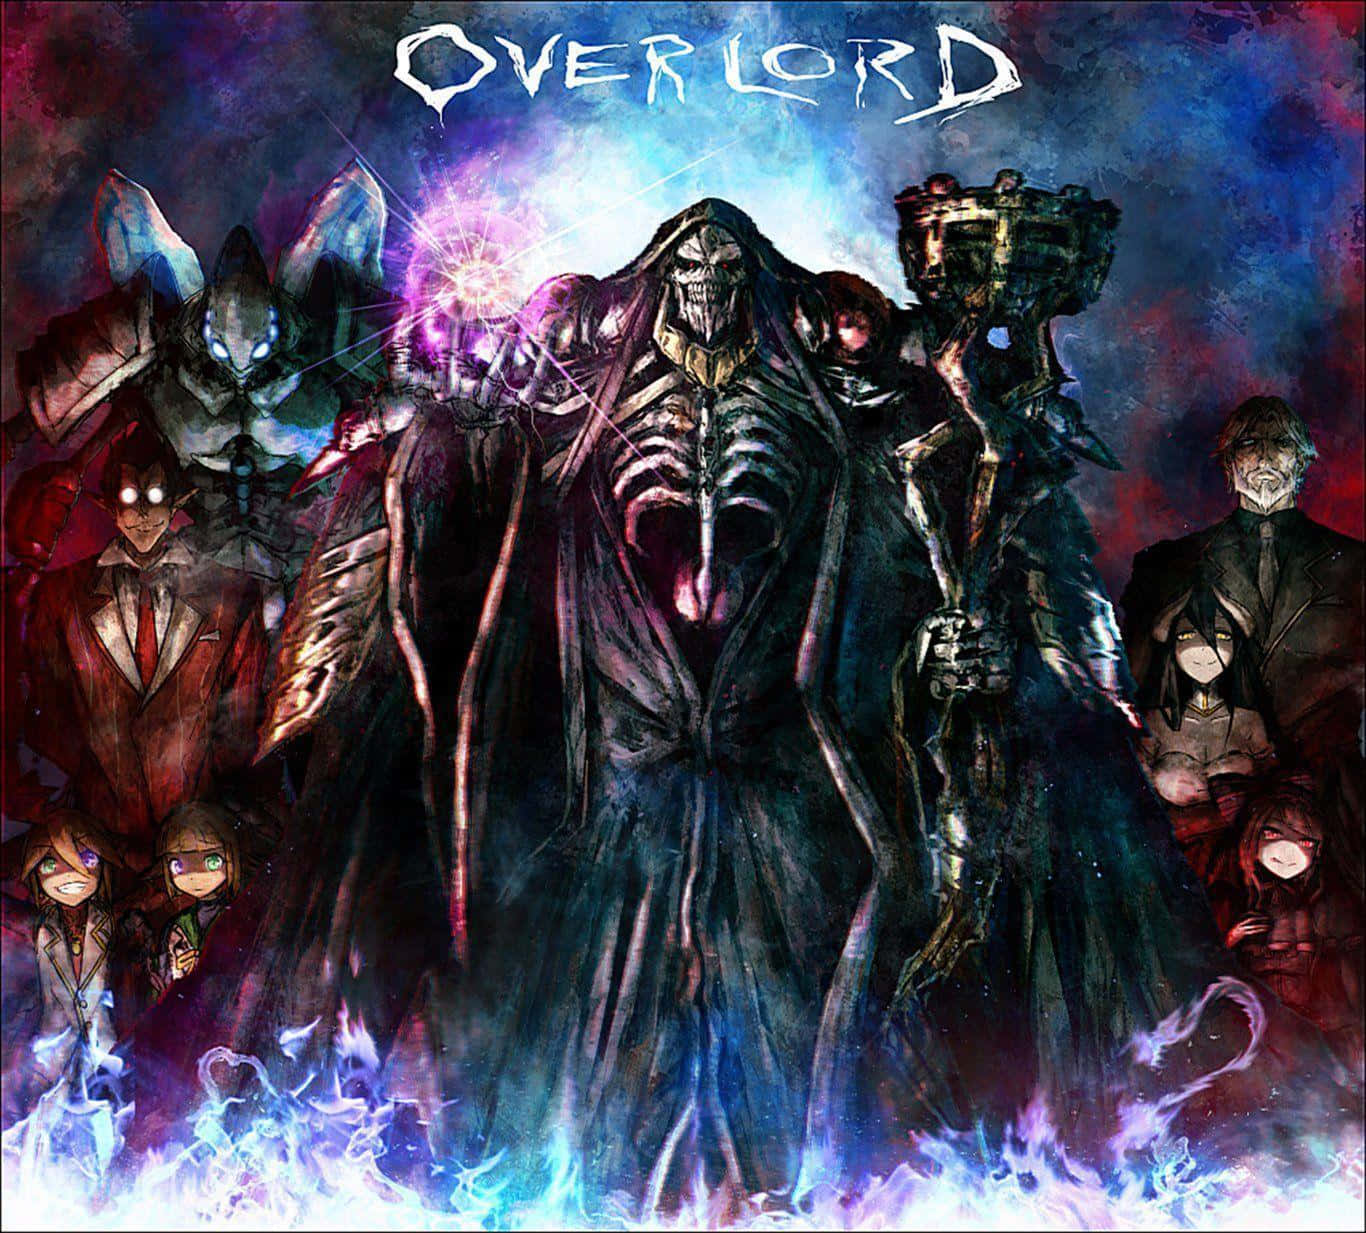 Join Us: A Chilling Glimpse of Ainz Ooal Gown